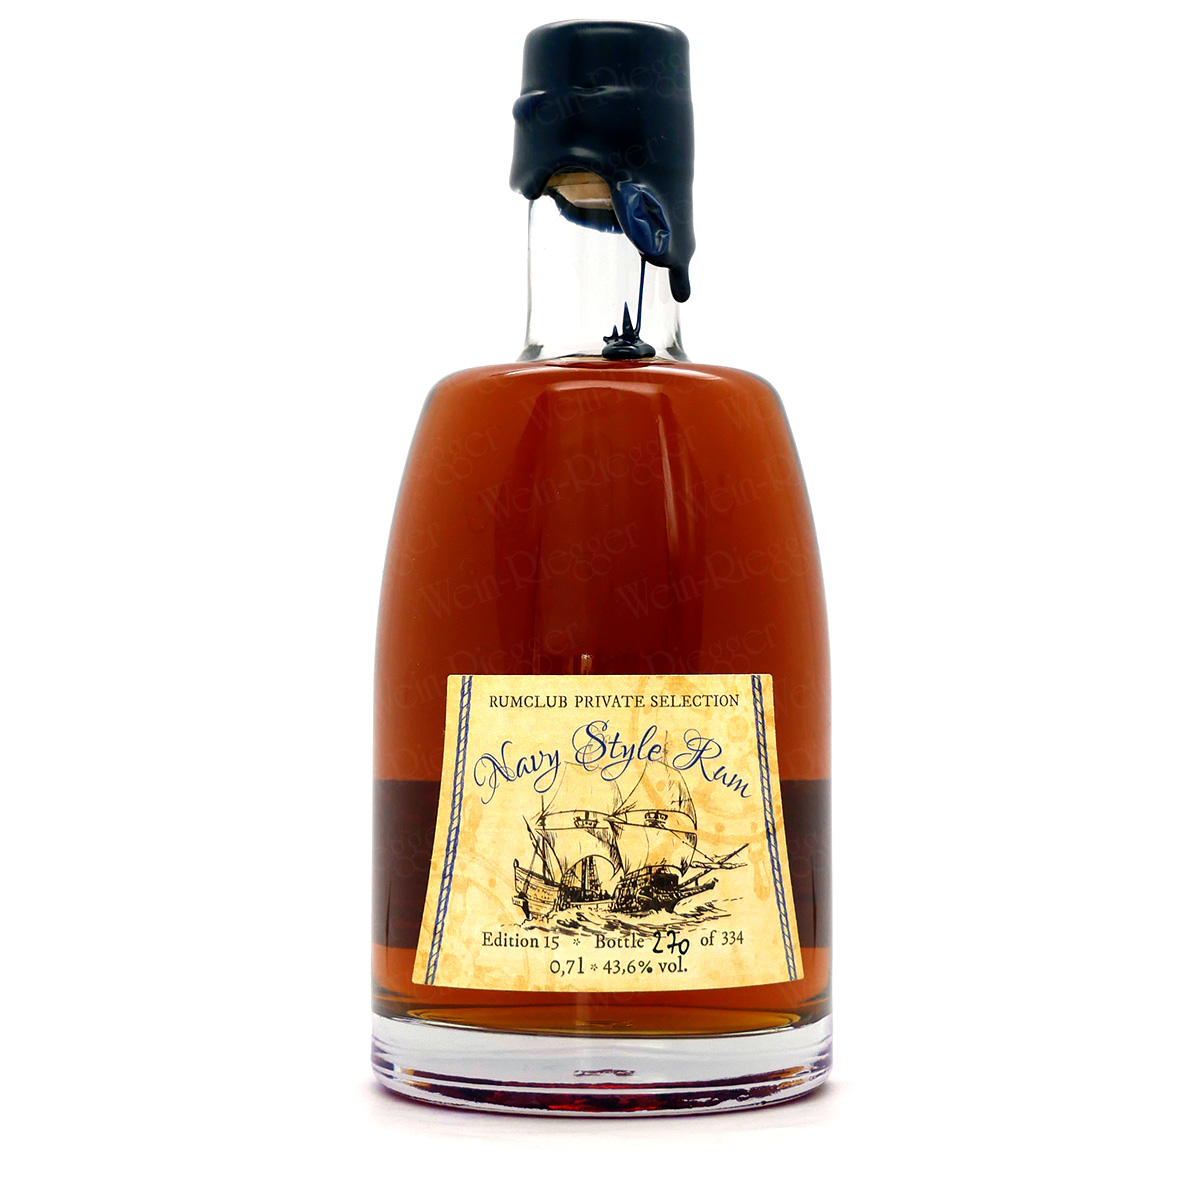 Navy Style Rum - Edition 15 Blended Rum | Rumclub Private Selection